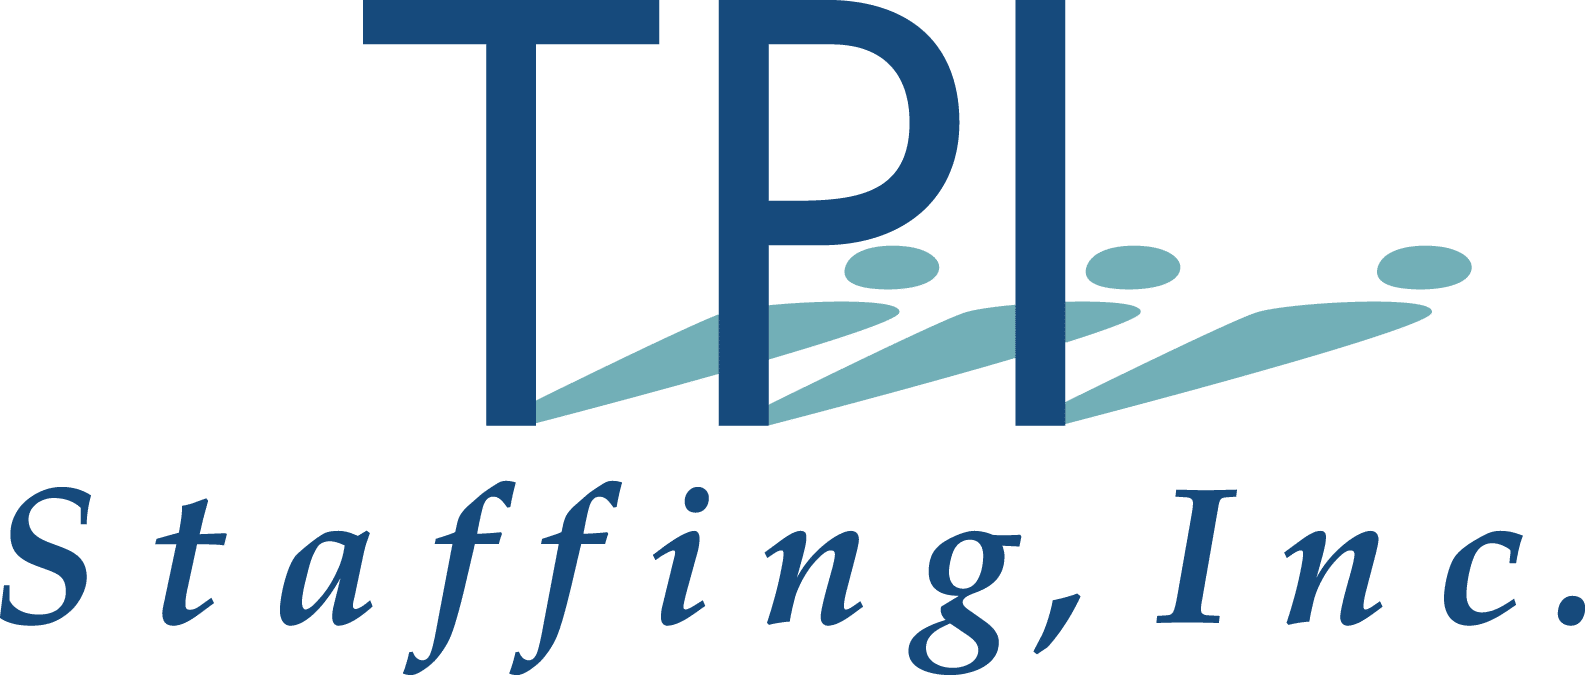 Ace Your Job Interview with TPI Staffing, Inc.